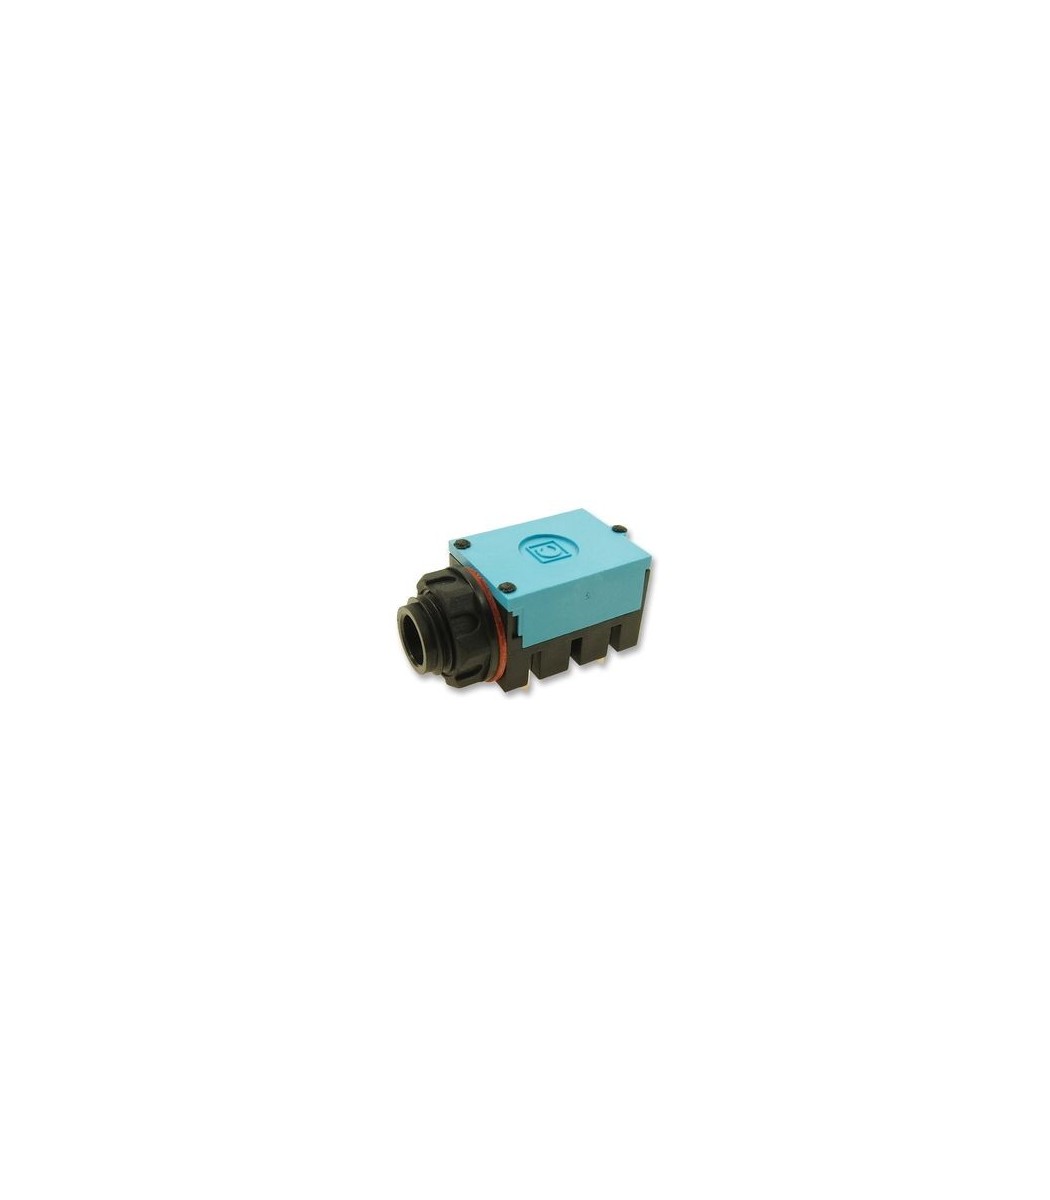 Phone Audio Connector, 2 Contacts, Socket, 6.35 mm, PCB Mount, Plastic Body